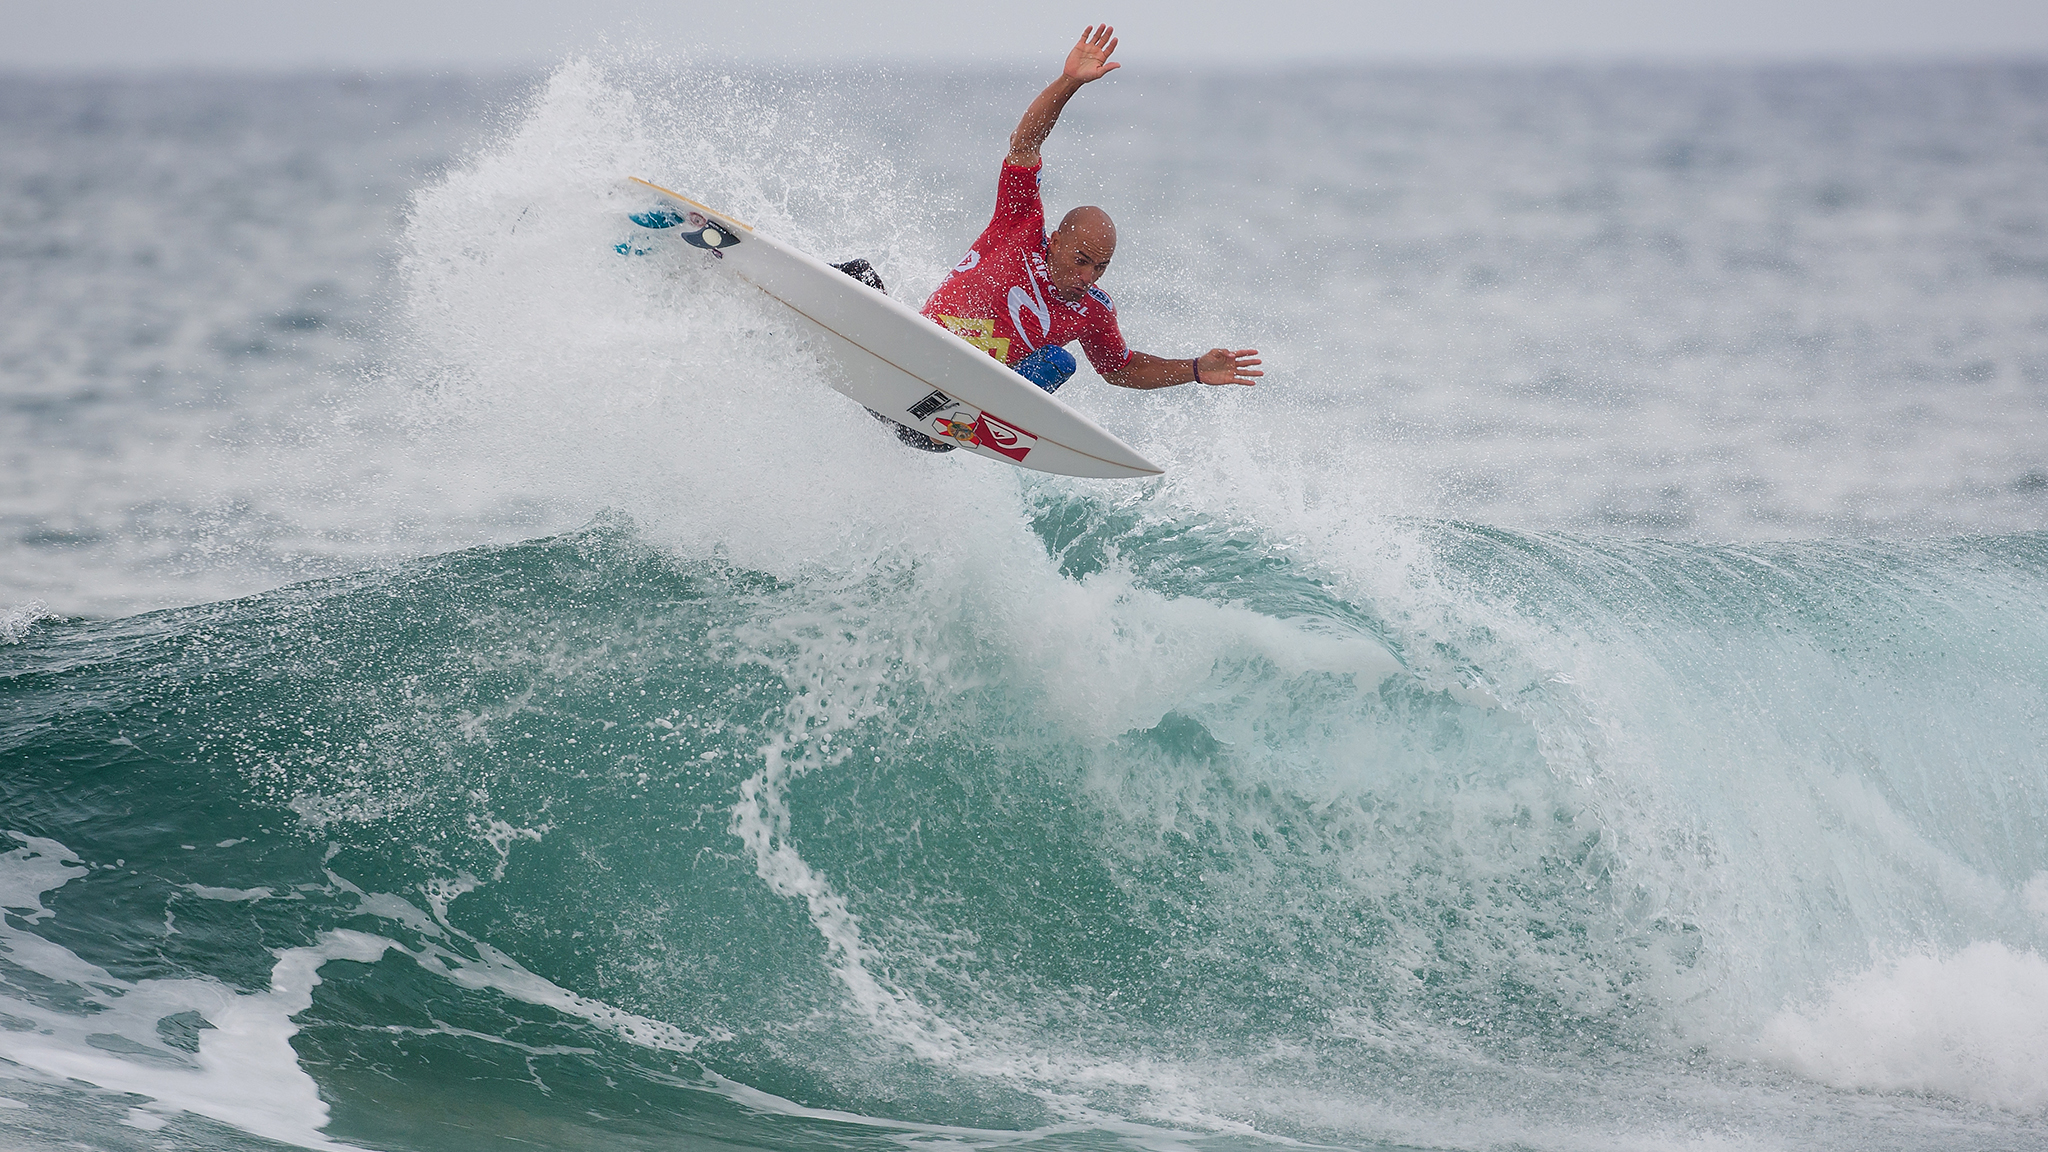 ASP World Tour surfer Kelly Slater will become a familiar name to ESPN viewers in 2014, following a three-year agreement between ESPN and the ASP to broadcast the 2014 season.